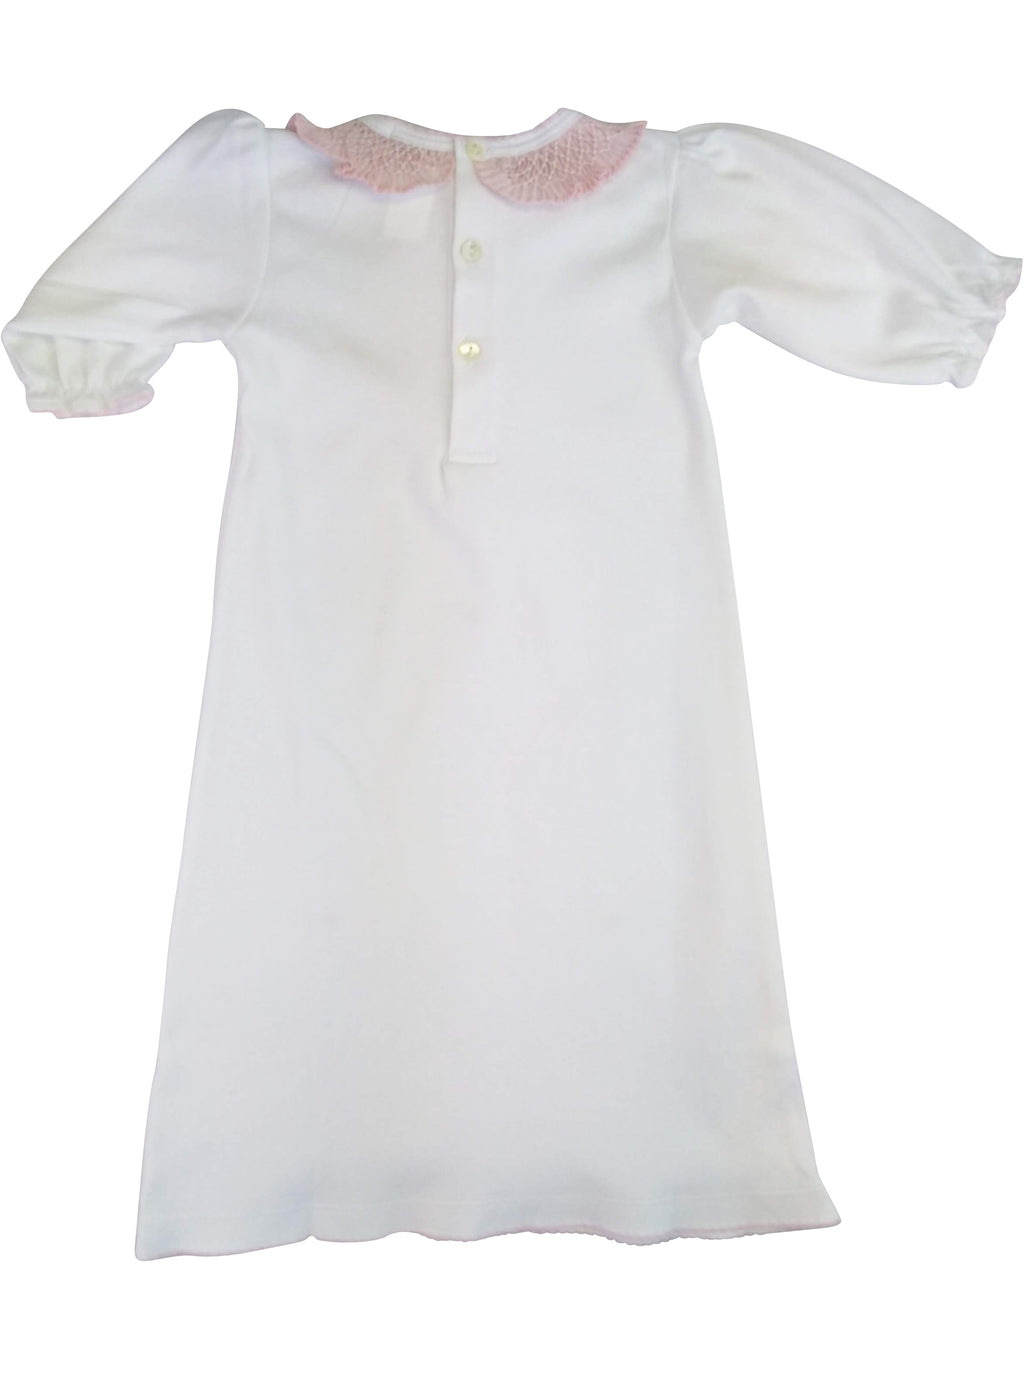 Baby Girl Pink Collar Daygown - Little Threads Inc. Children's Clothing